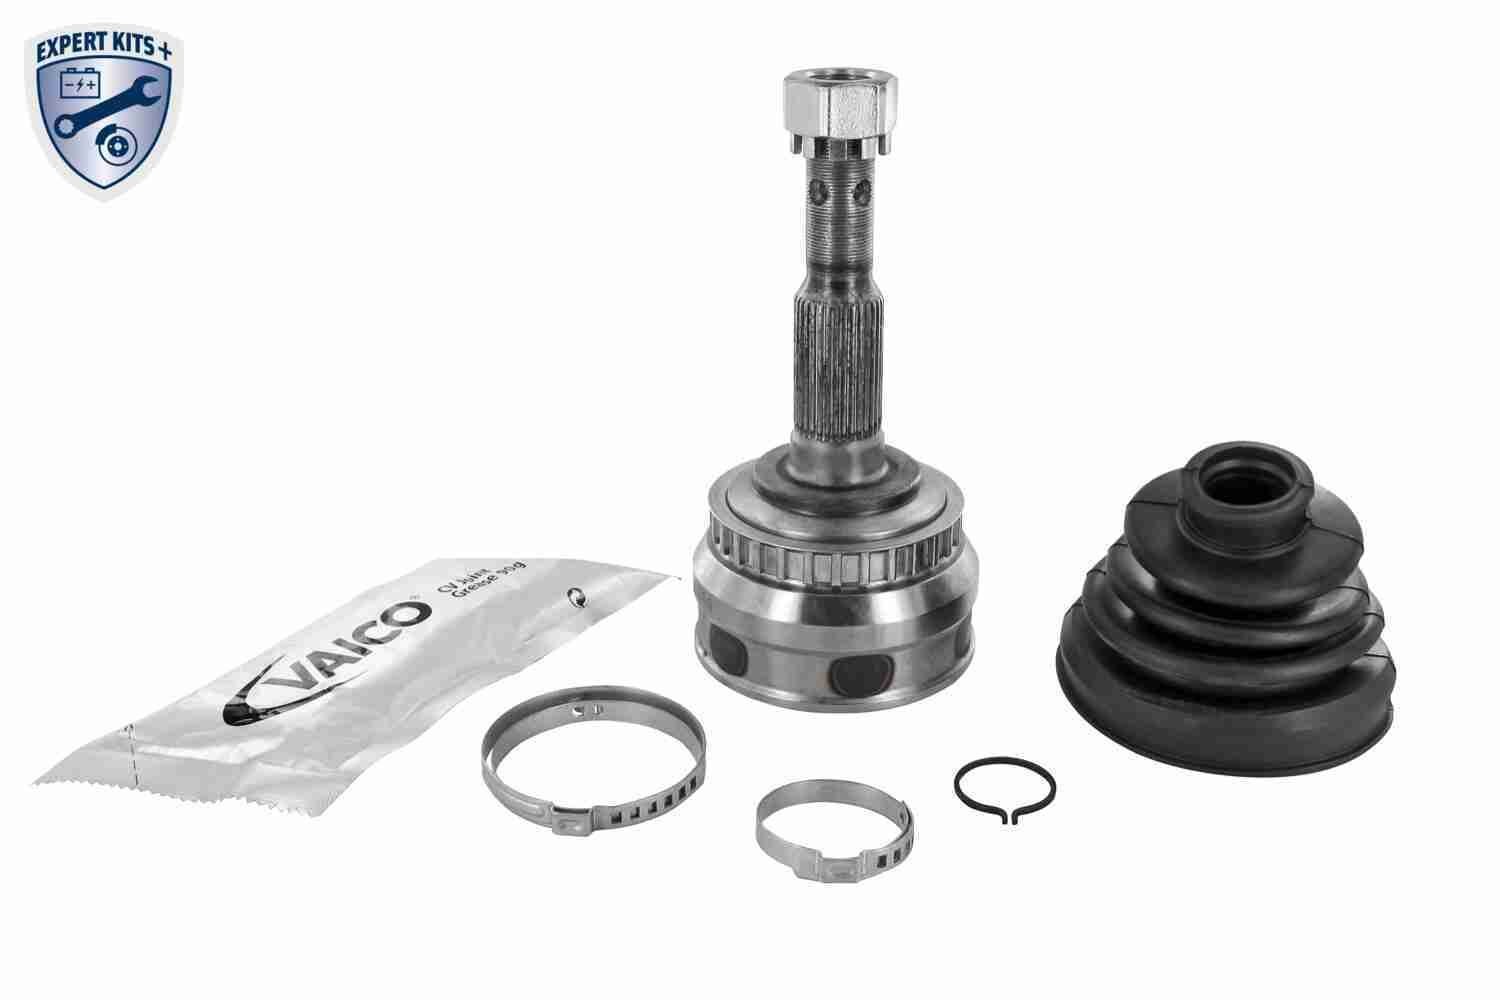 VAICO V40-0200 Joint kit, drive shaft EXPERT KITS +, Wheel Side, with ABS ring